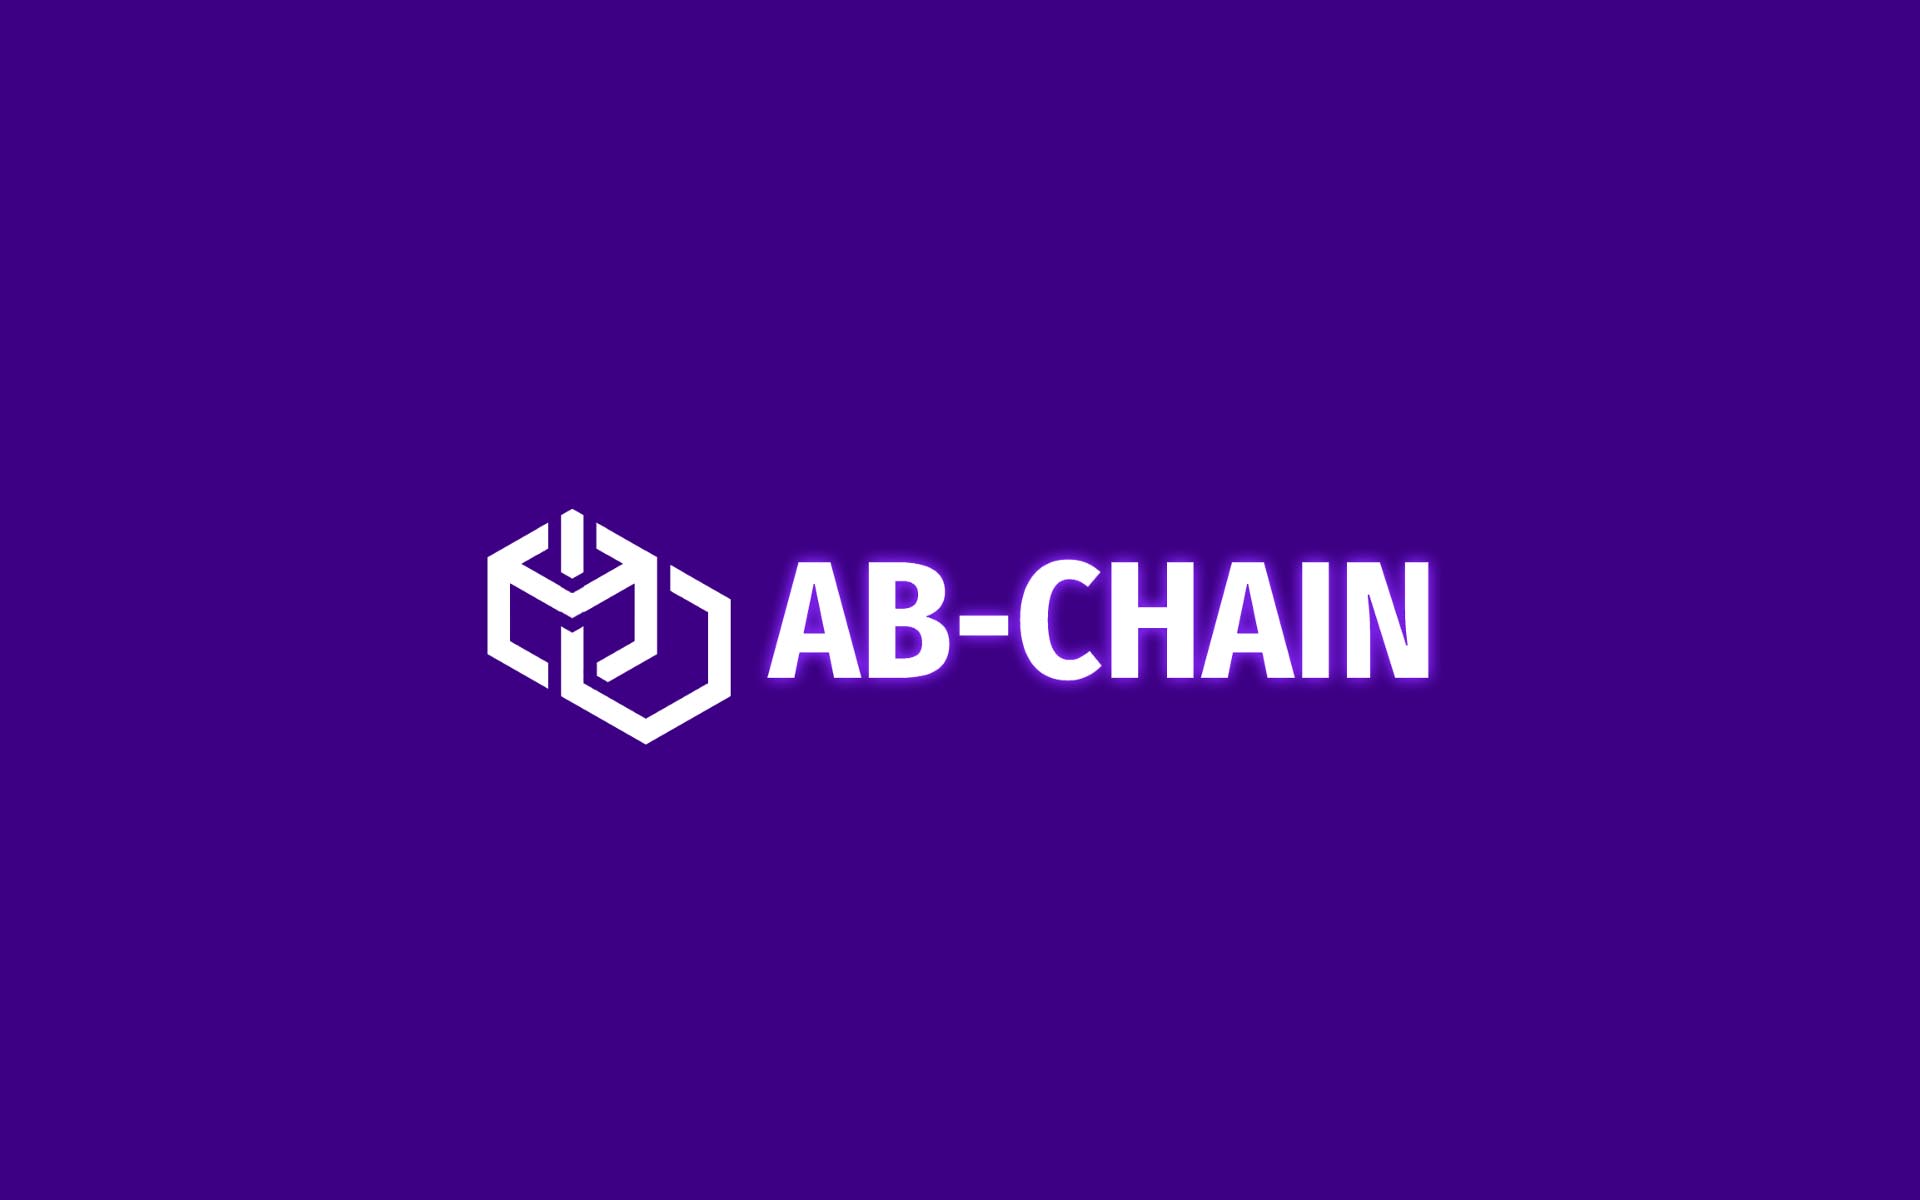 AB-CHAIN’s New Cryptocurrency Makes Advertising Easy for Both Cryptocurrency Companies and Publishers